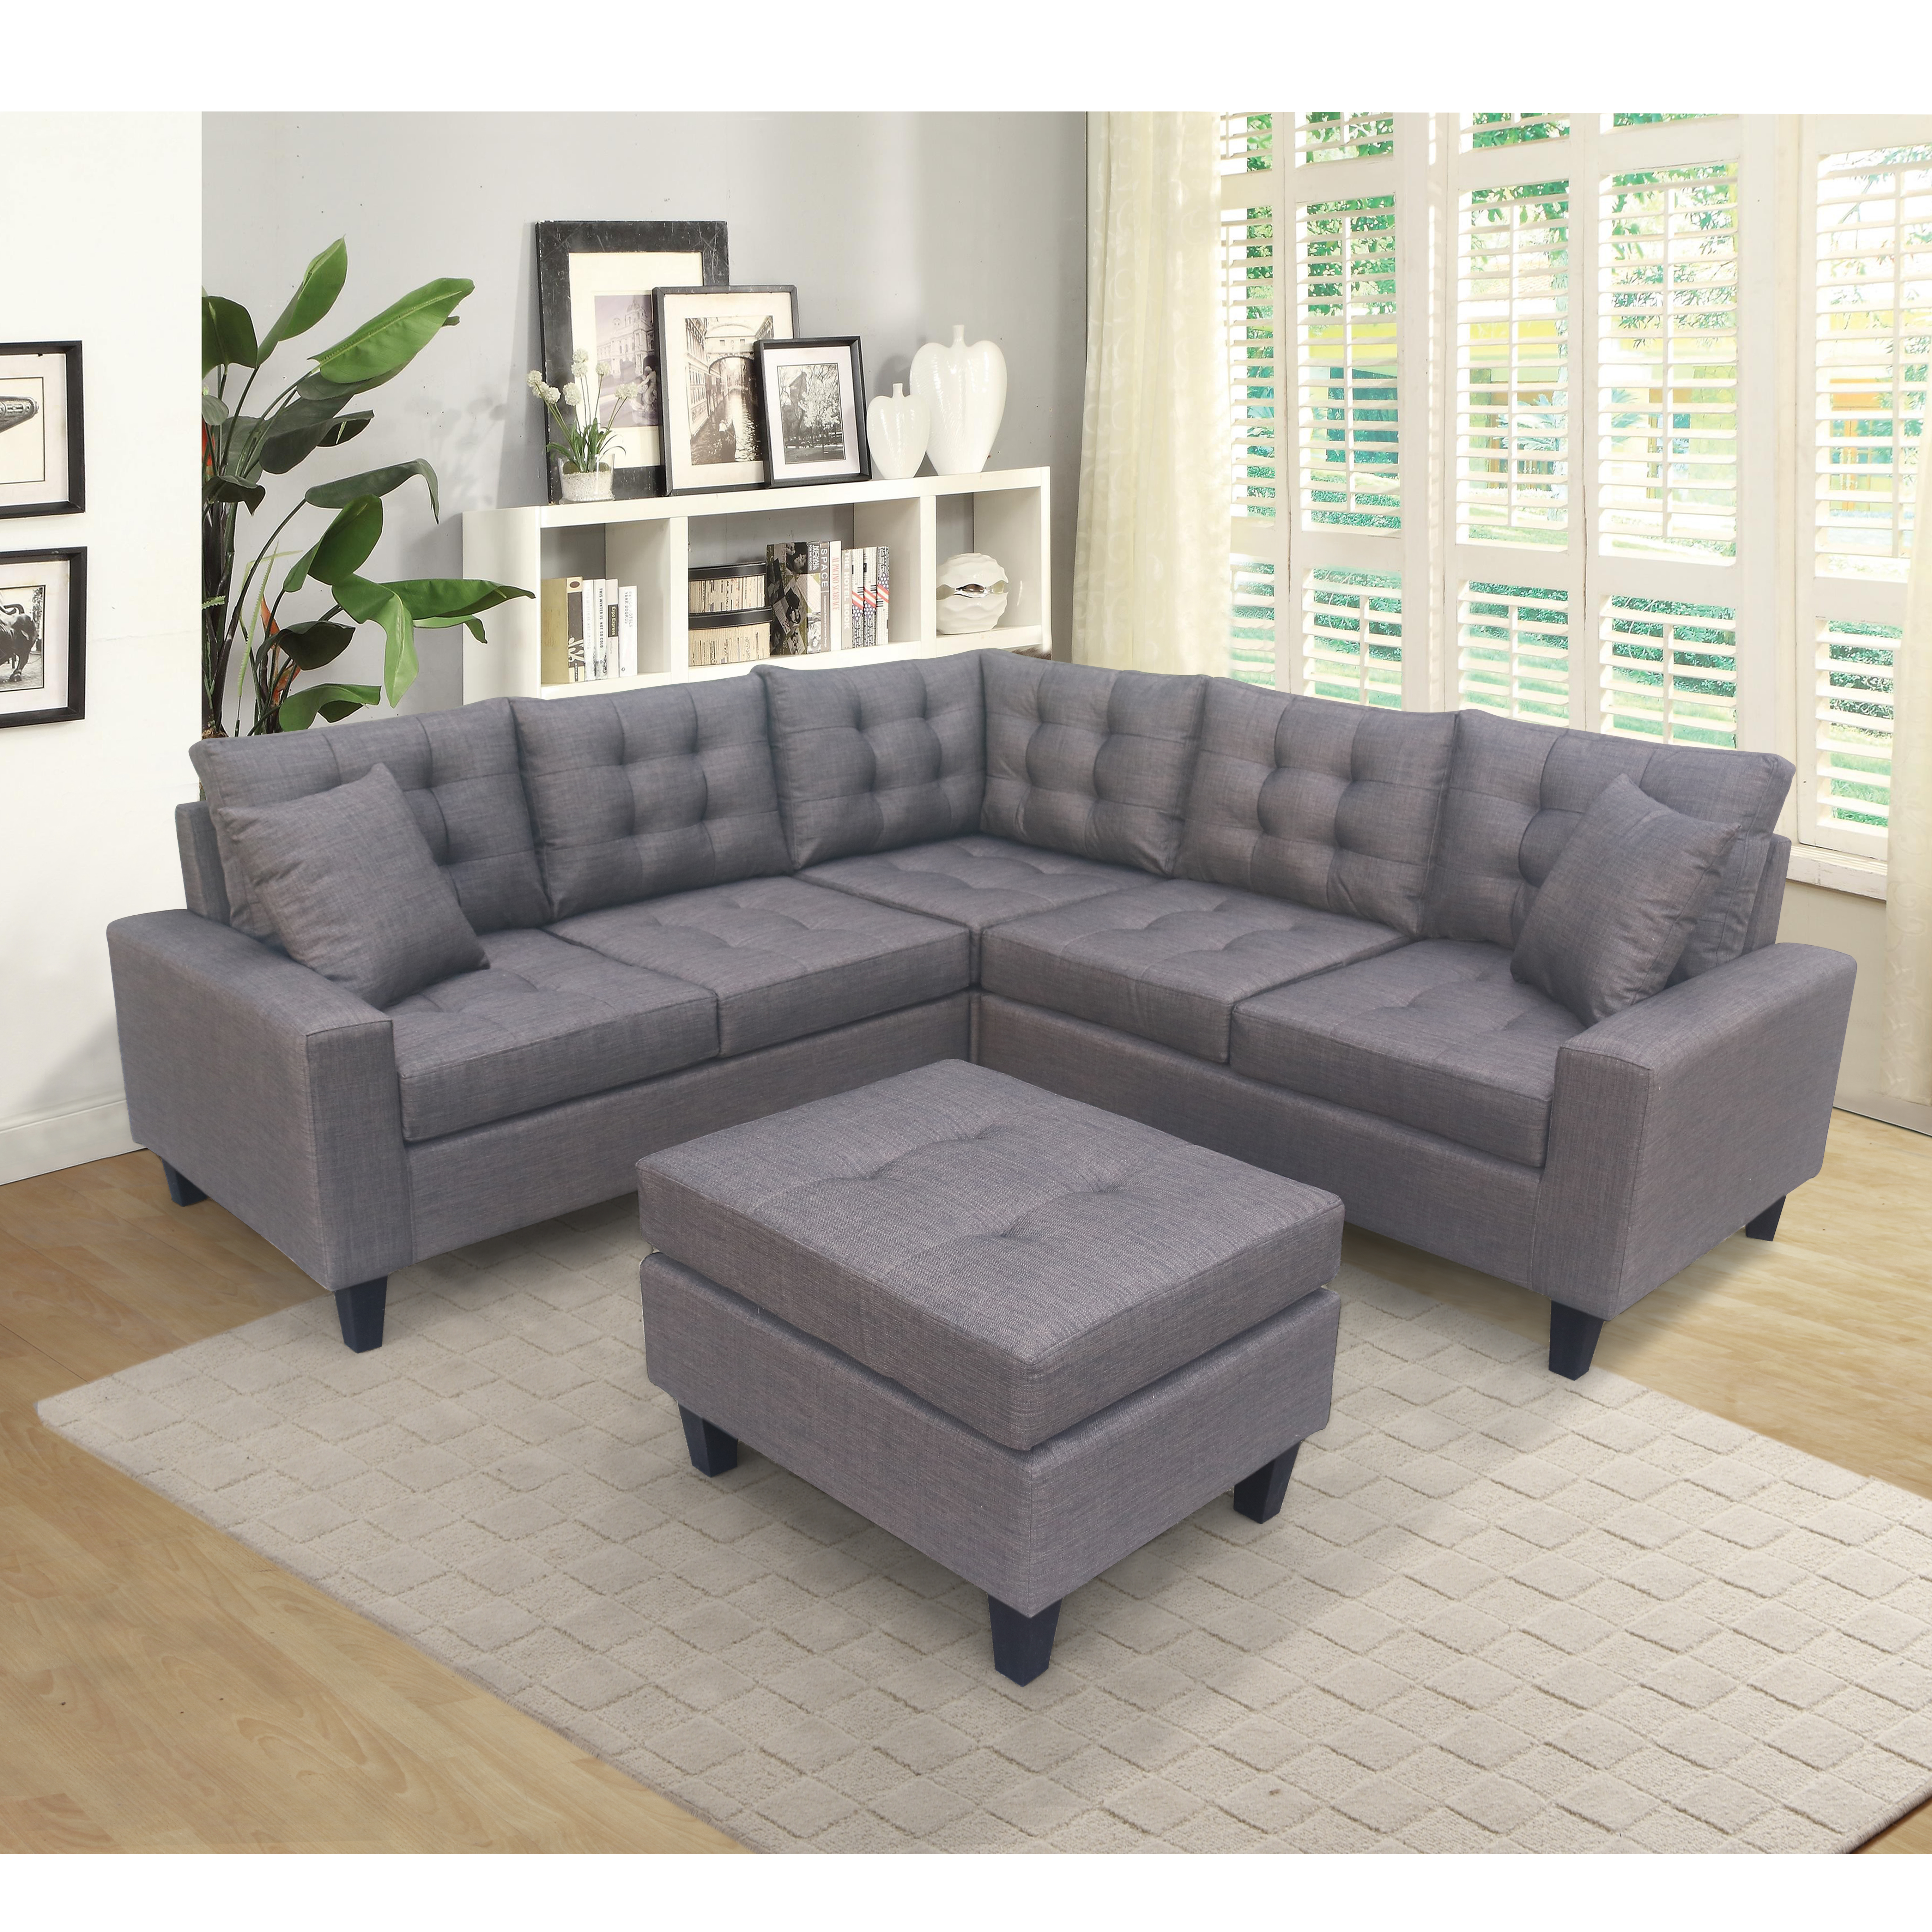 Sectional Sofa Set  for Living Room with  Chaise Lounge and  Ottoman-Boyel Living